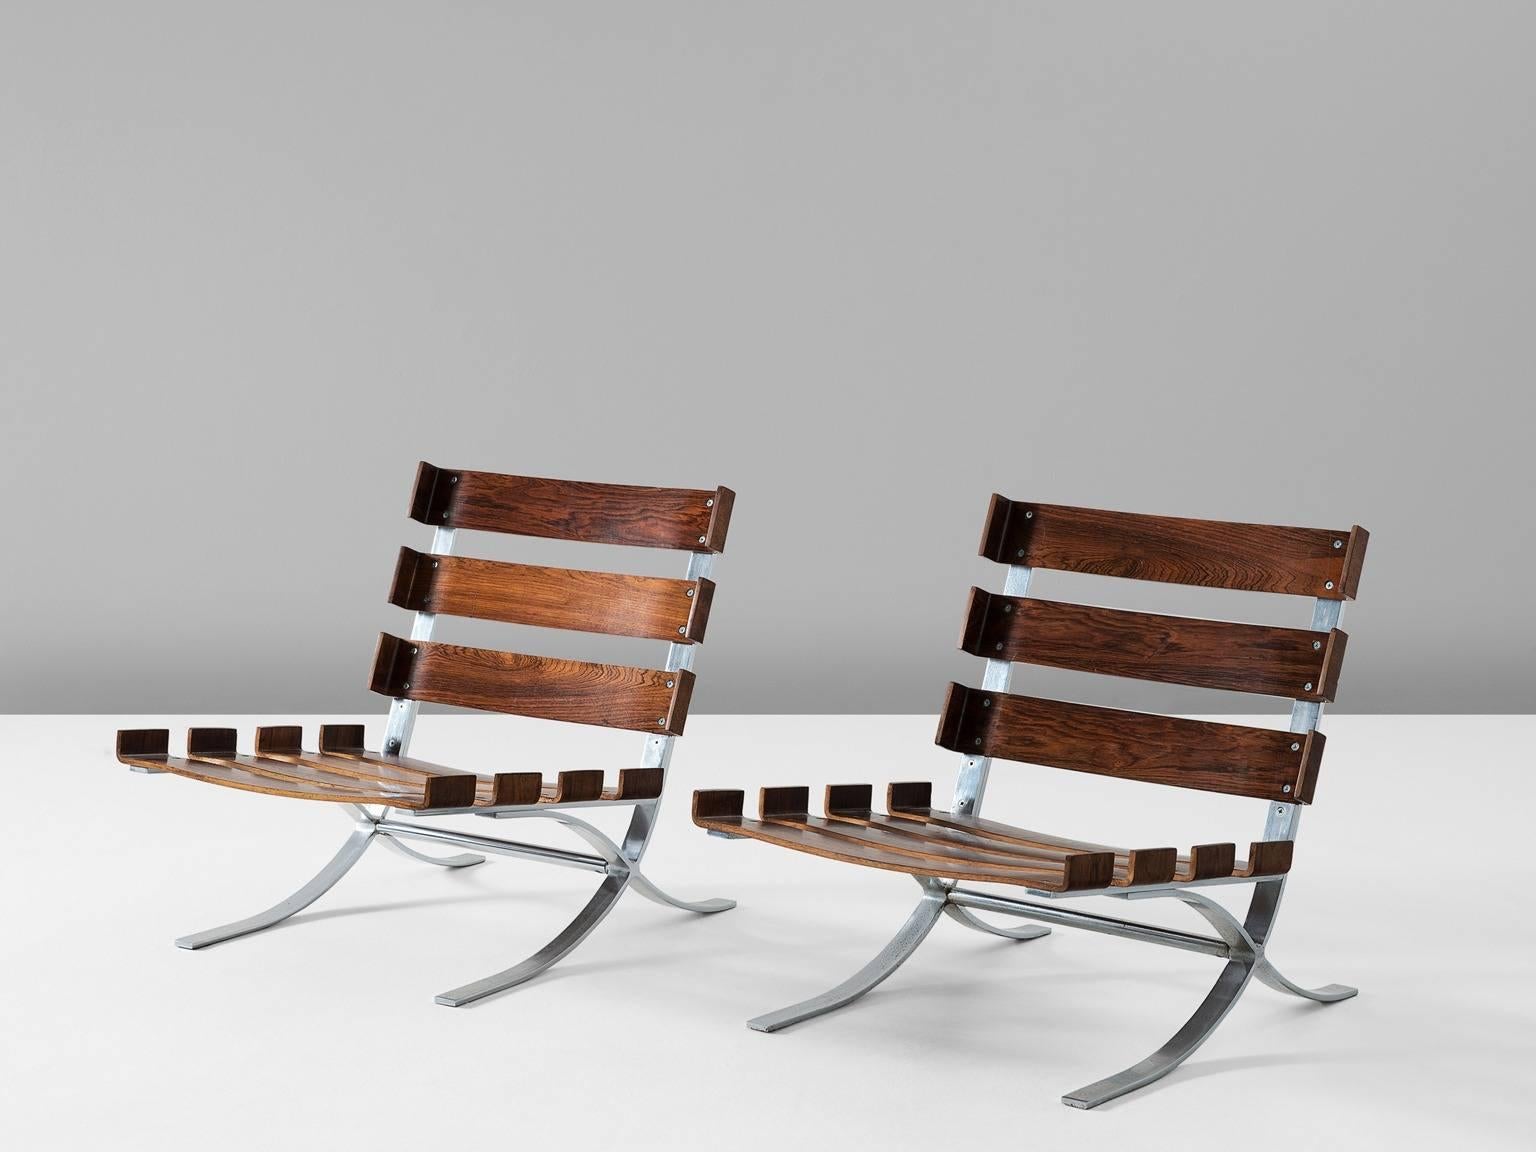 Easy chairs, in steel and rosewood, Europe, 1970s.

A pair of X-shaped lounge chairs. The very well formed metal frames hold a sturdy rosewood slat seating and back. These desirable chairs can be placed in the same range of style as the famous,